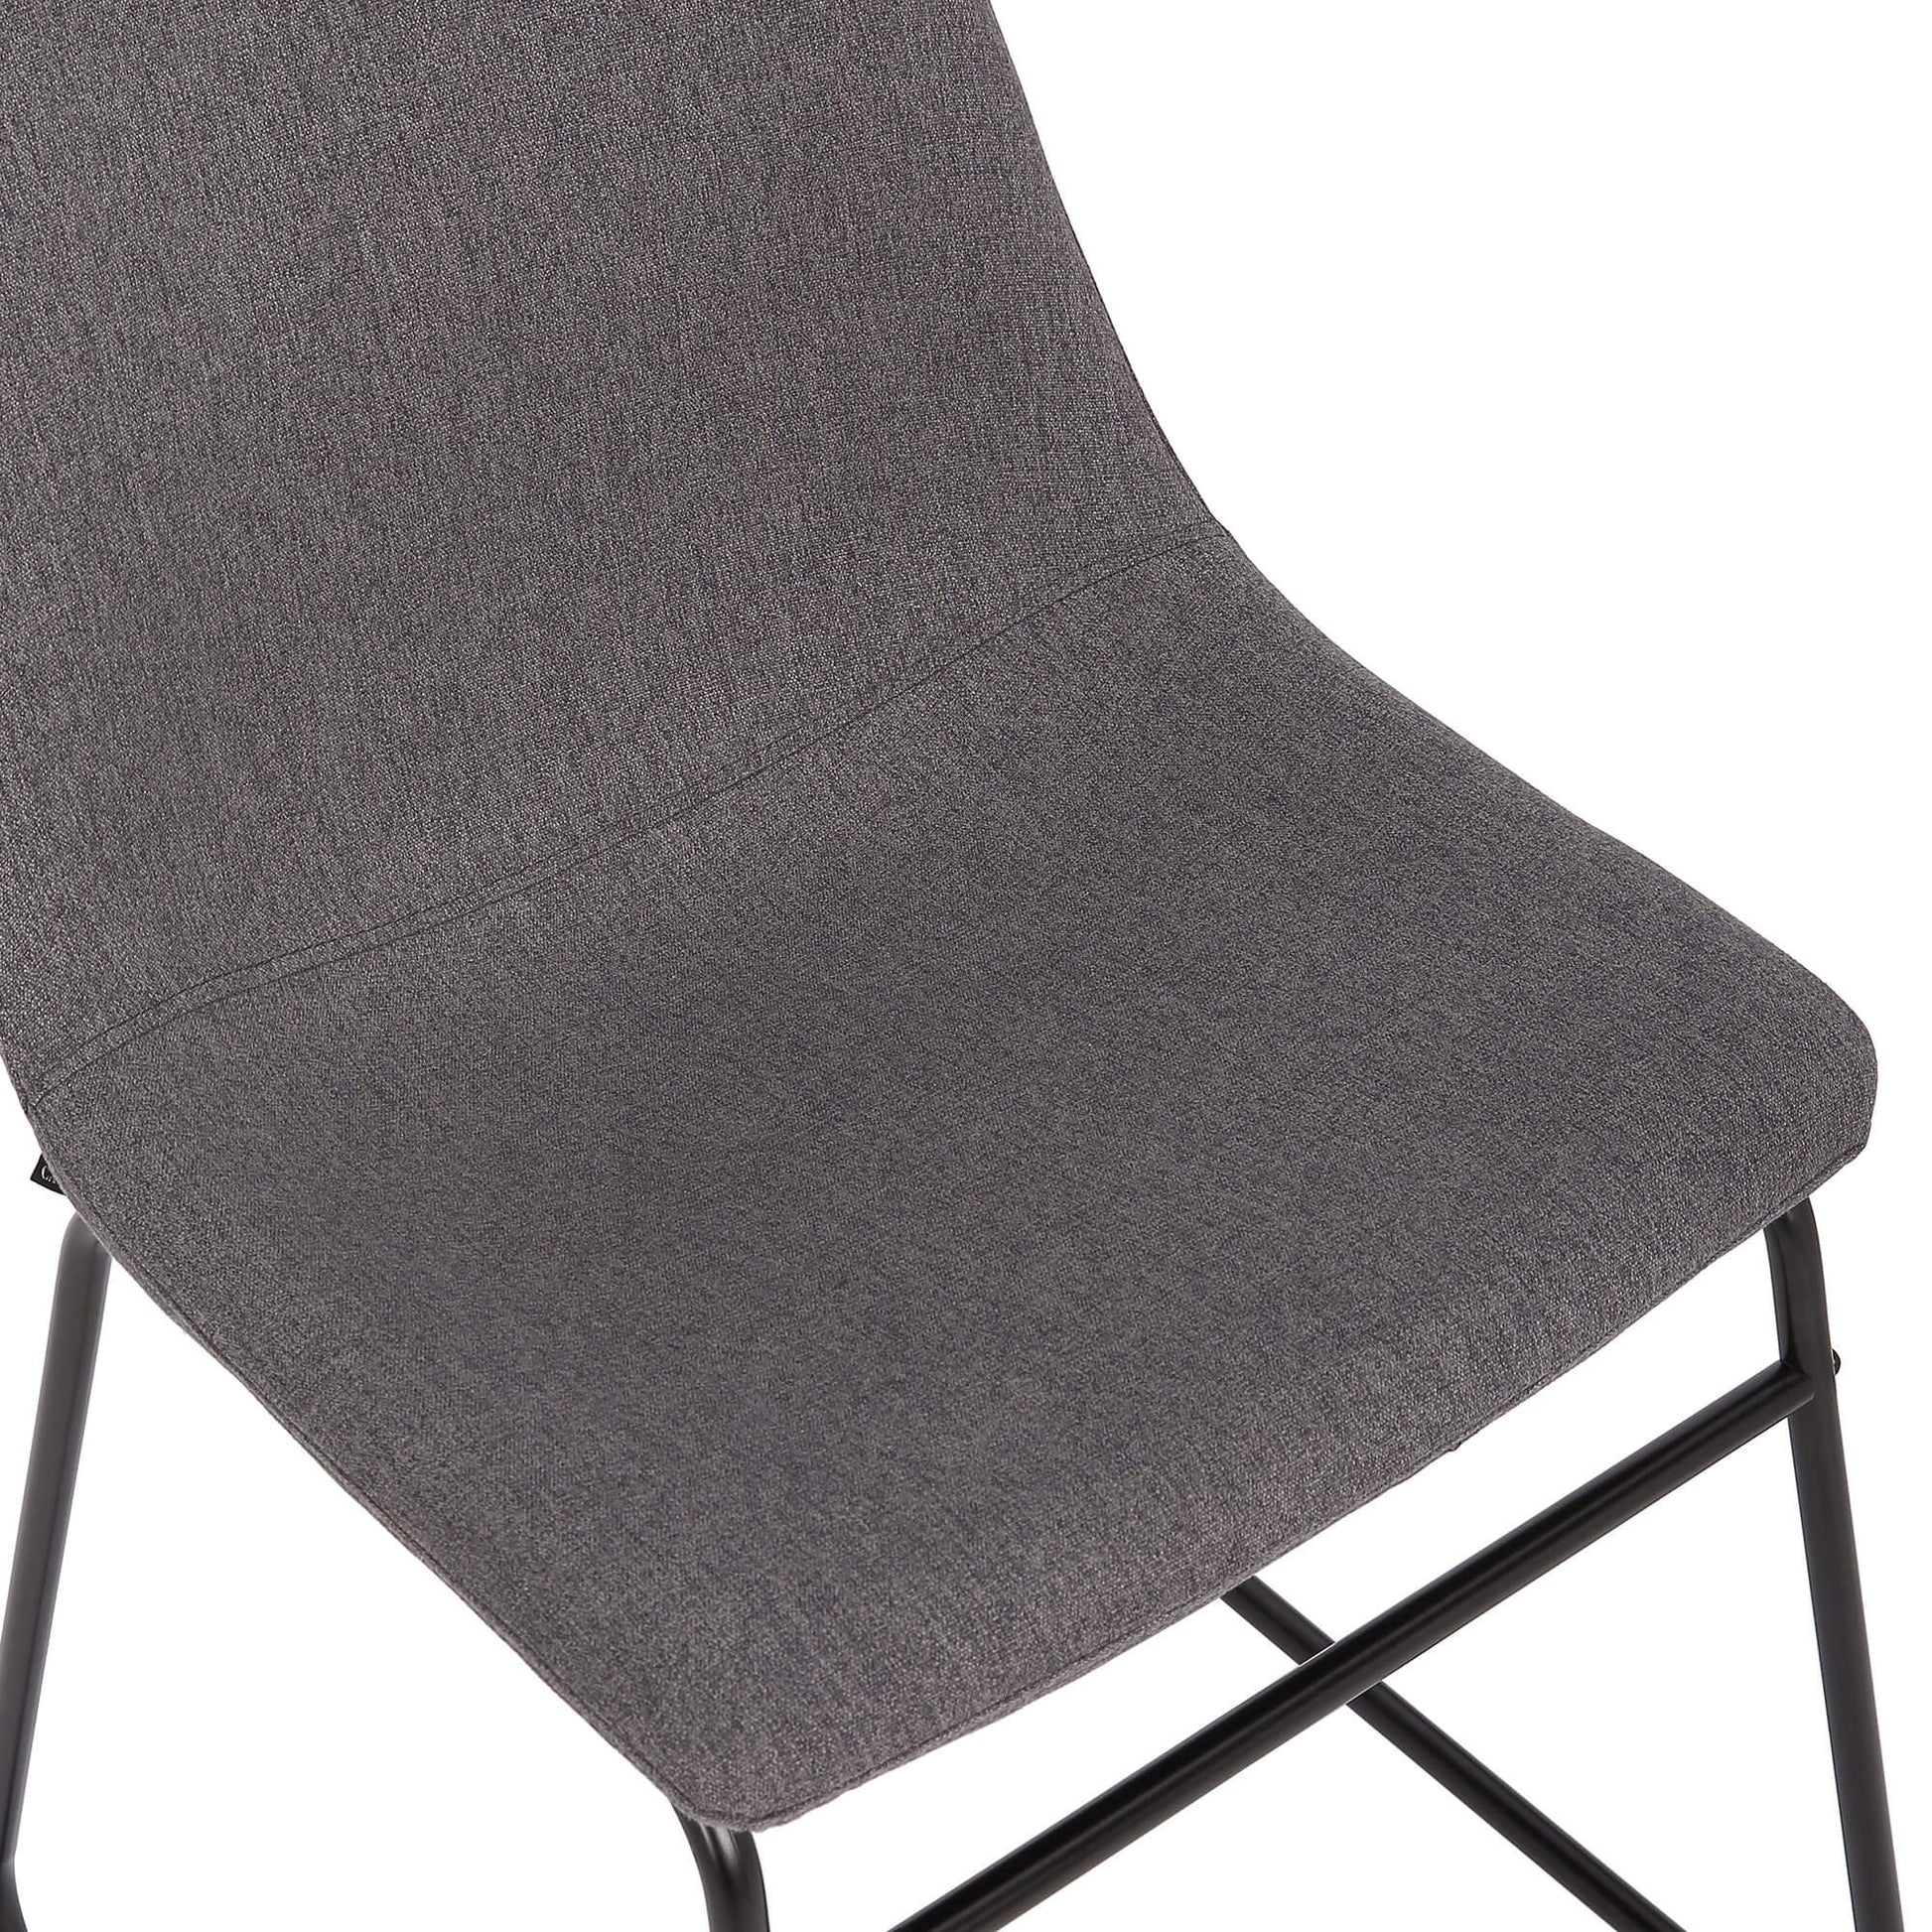 Rothbury | Commercial Stain Resistant Waterproof Fabric Dining Chairs | Set Of 2 | Dark Grey